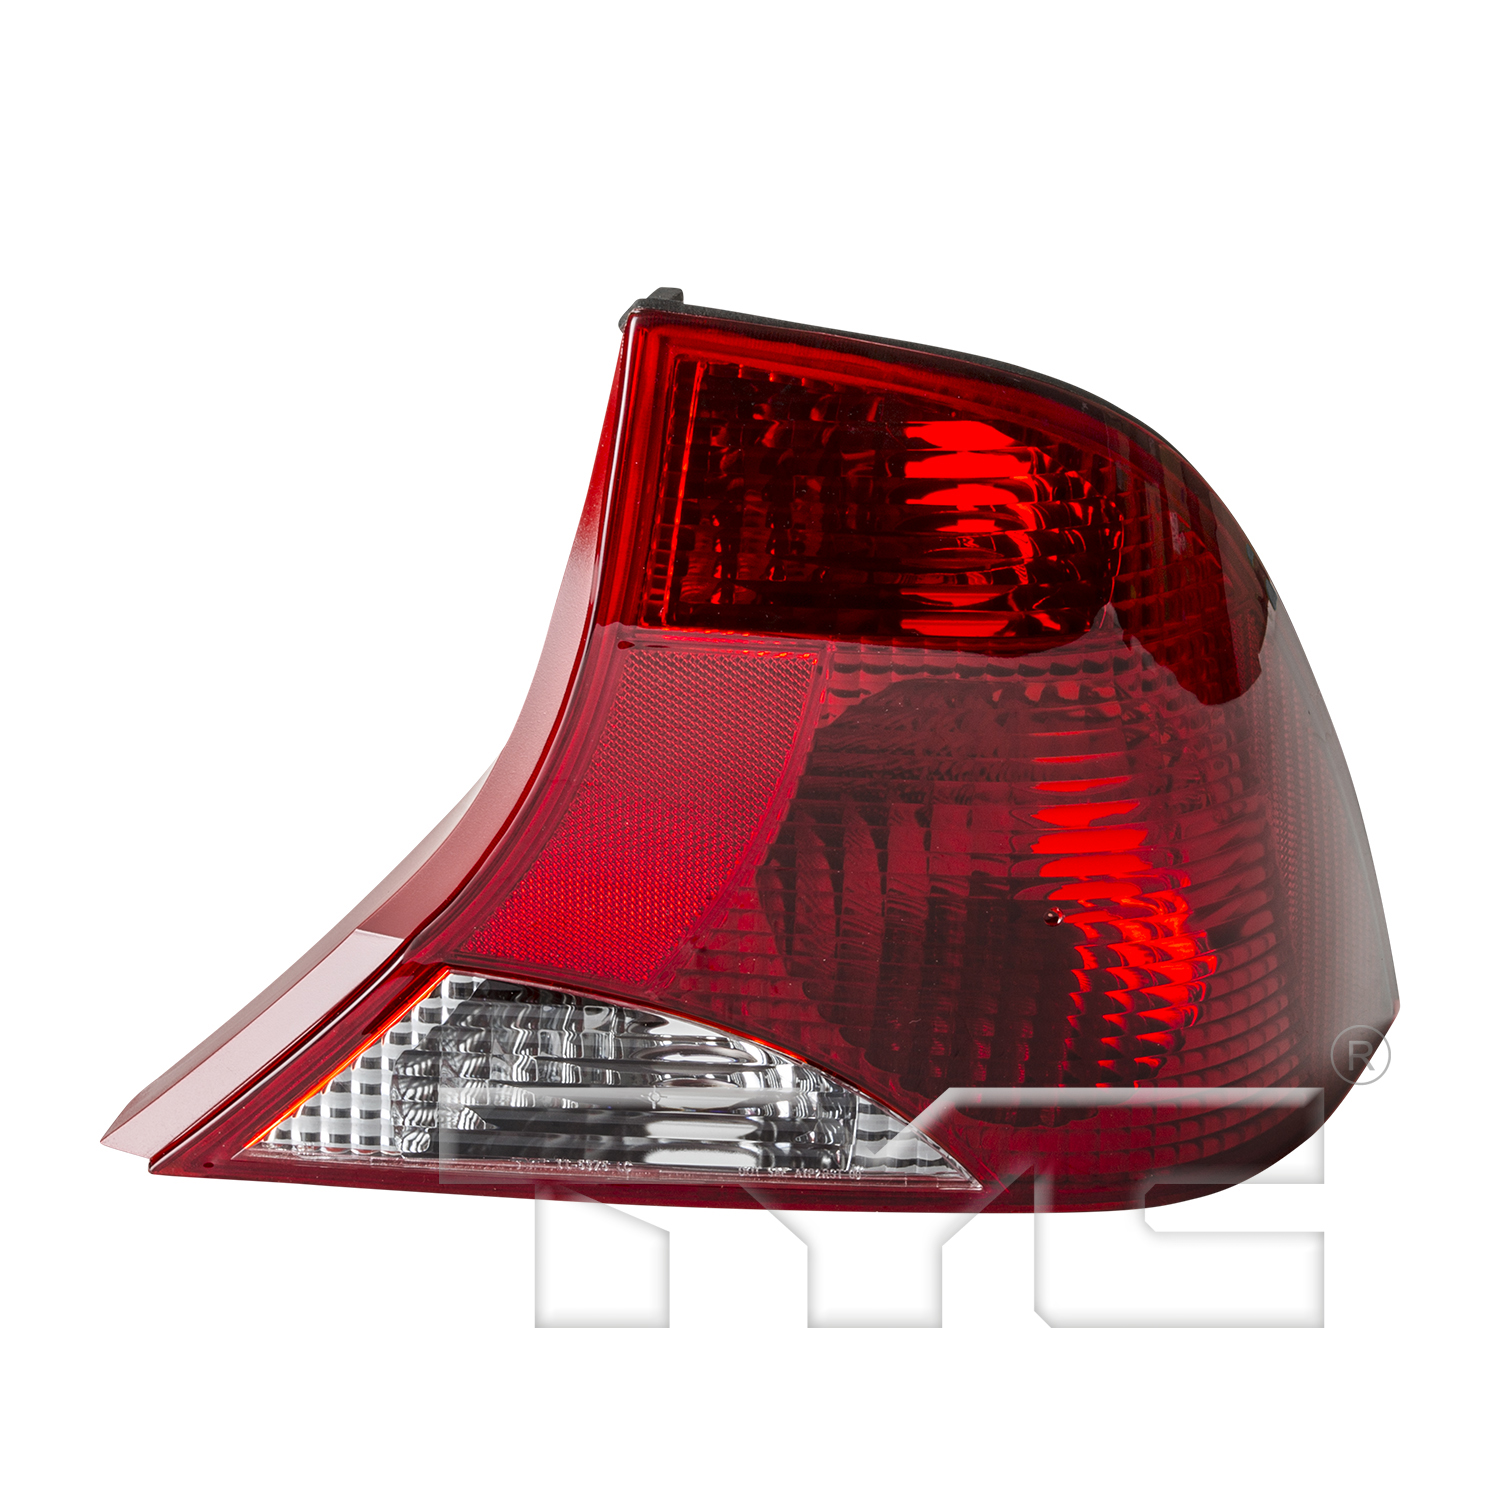 Aftermarket TAILLIGHTS for FORD - FOCUS, FOCUS,02-03,RT Taillamp assy